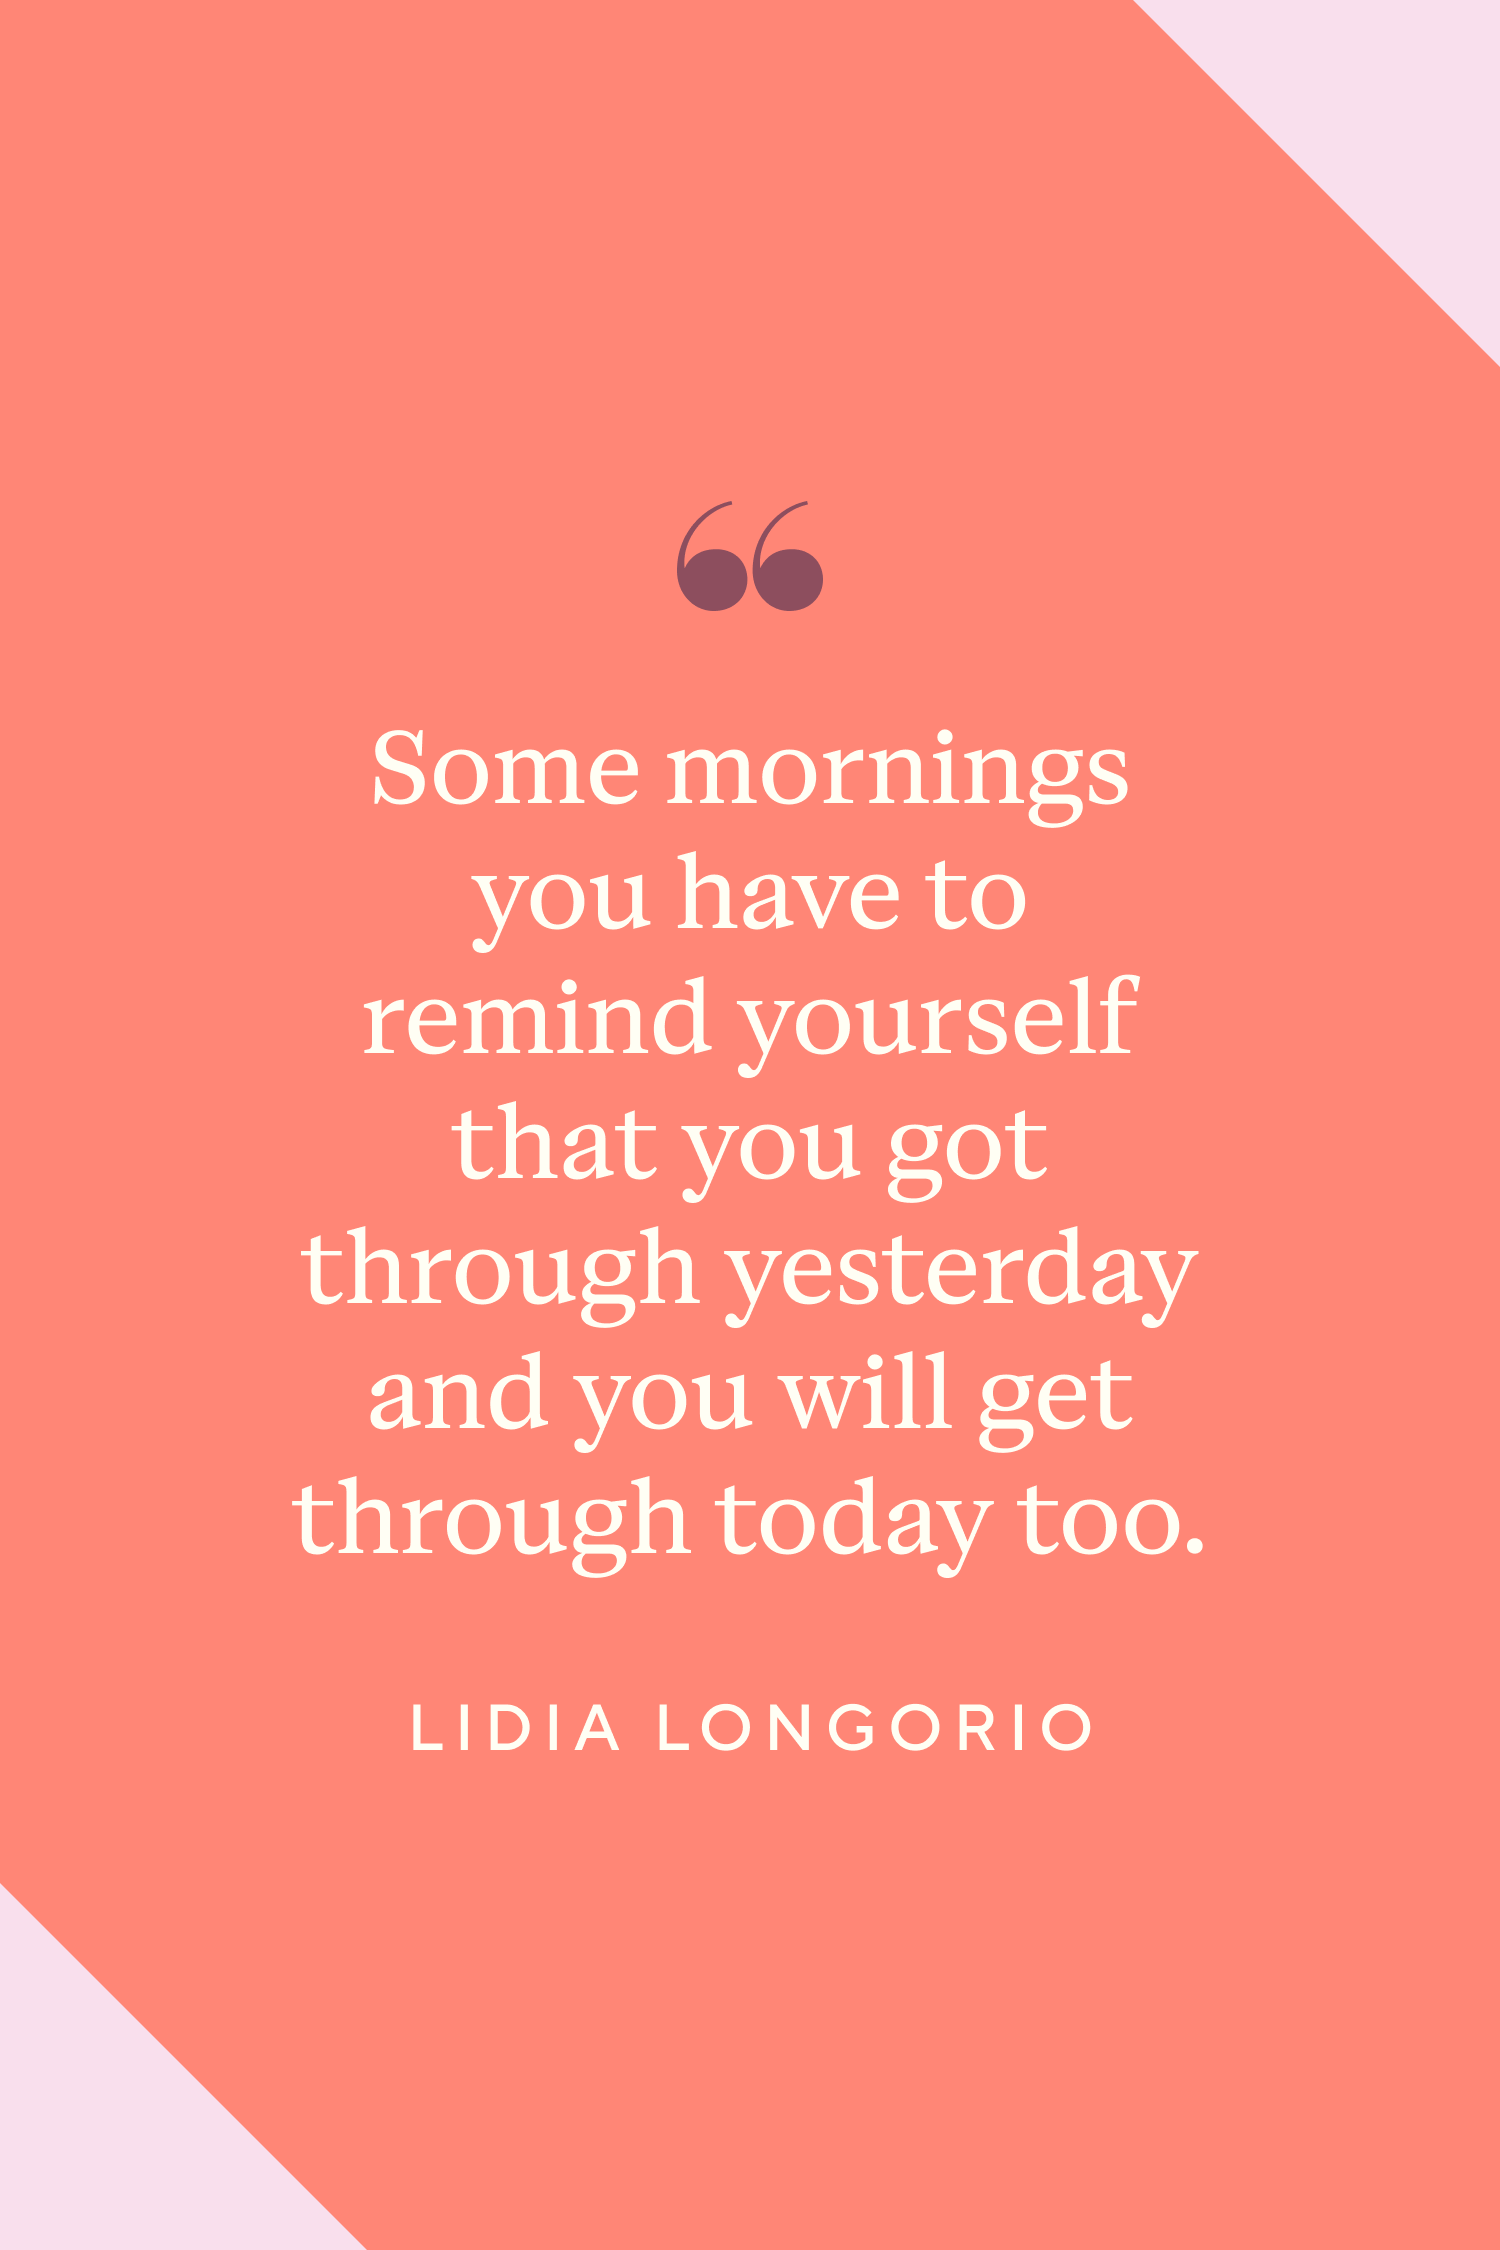 25 Motivational Morning Quotes To Inspire Your Day